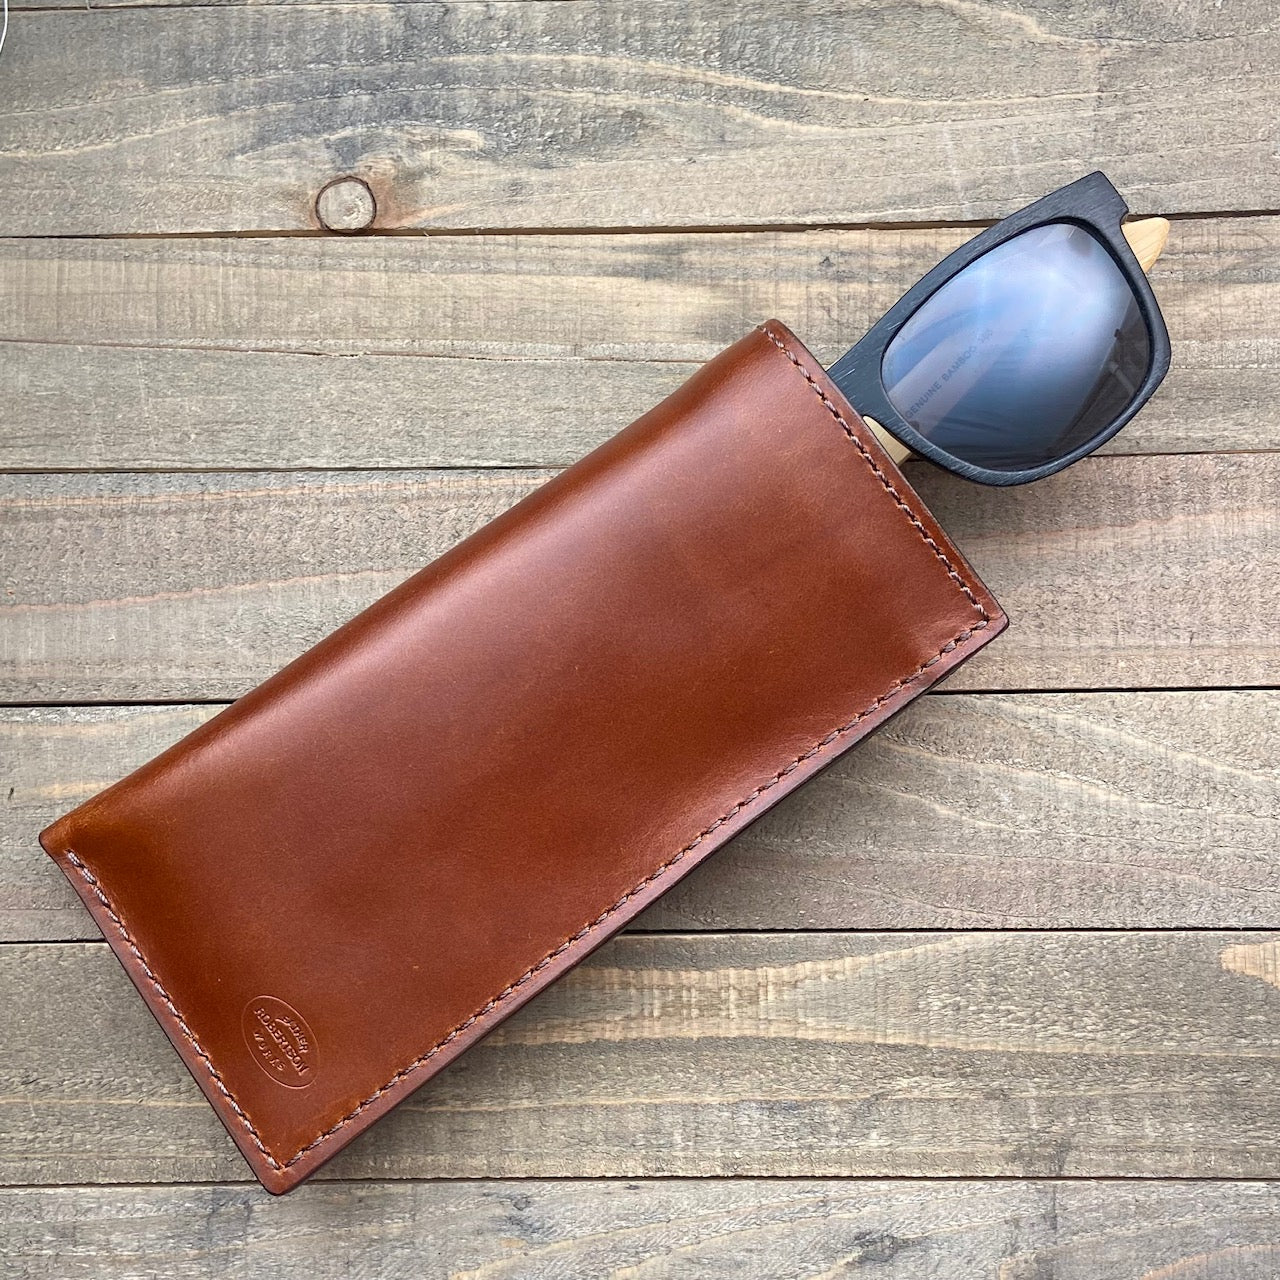 Sienna Oxford Sunglasses Case, Lined in Suede